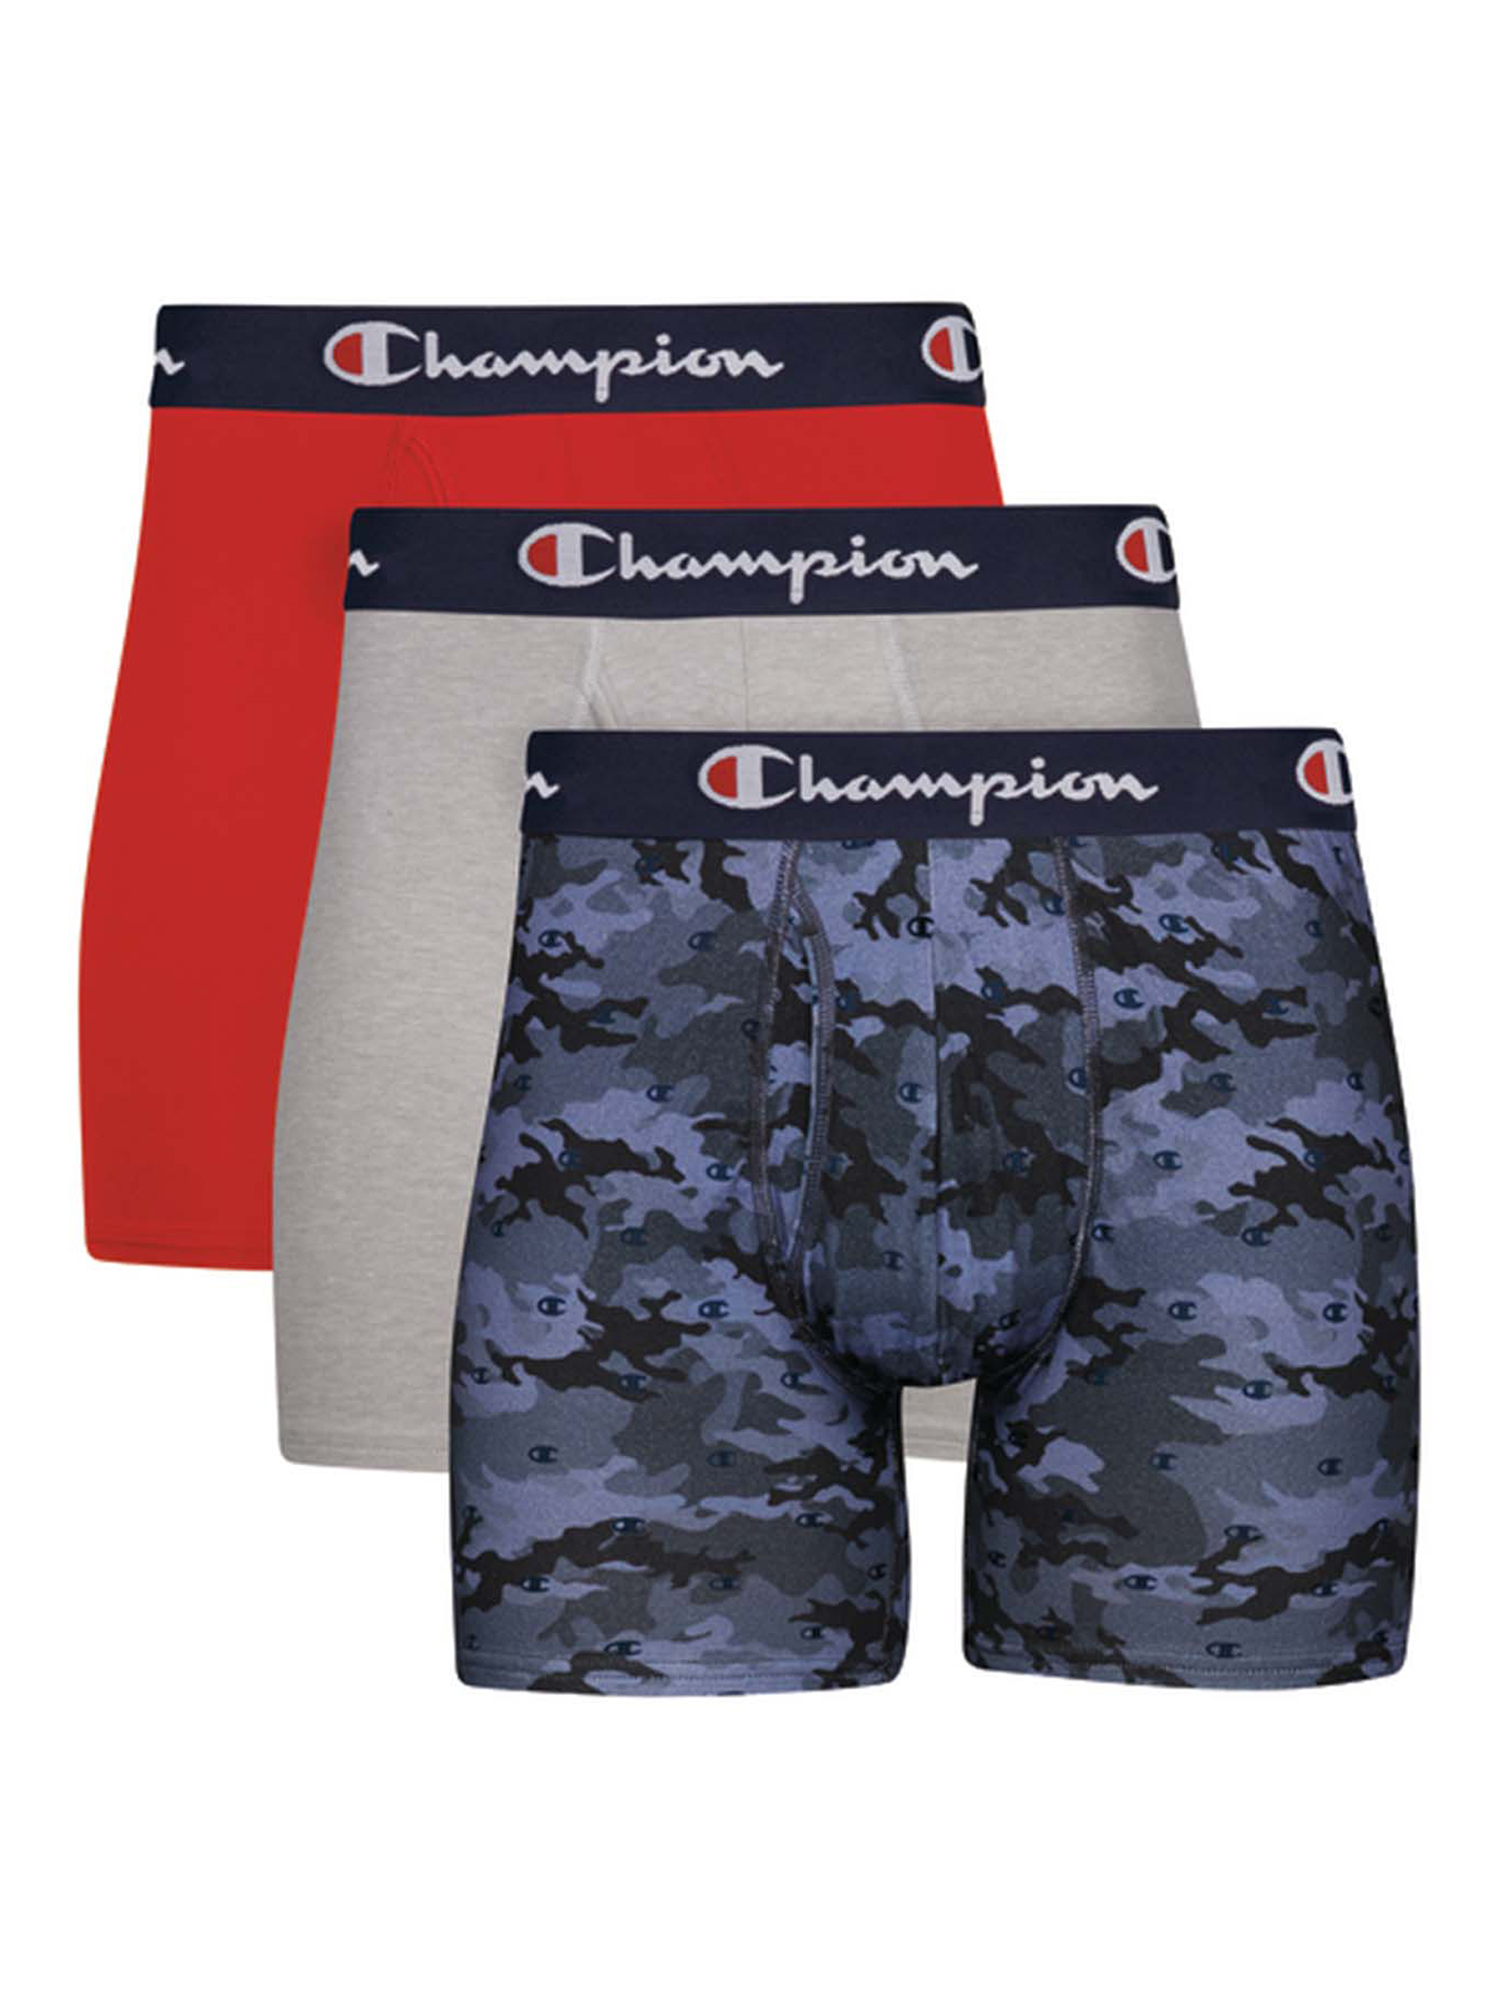 Champion Men's Lightweight Stretch Total Support Pouch Boxer Brief, 3 Pack - image 1 of 7